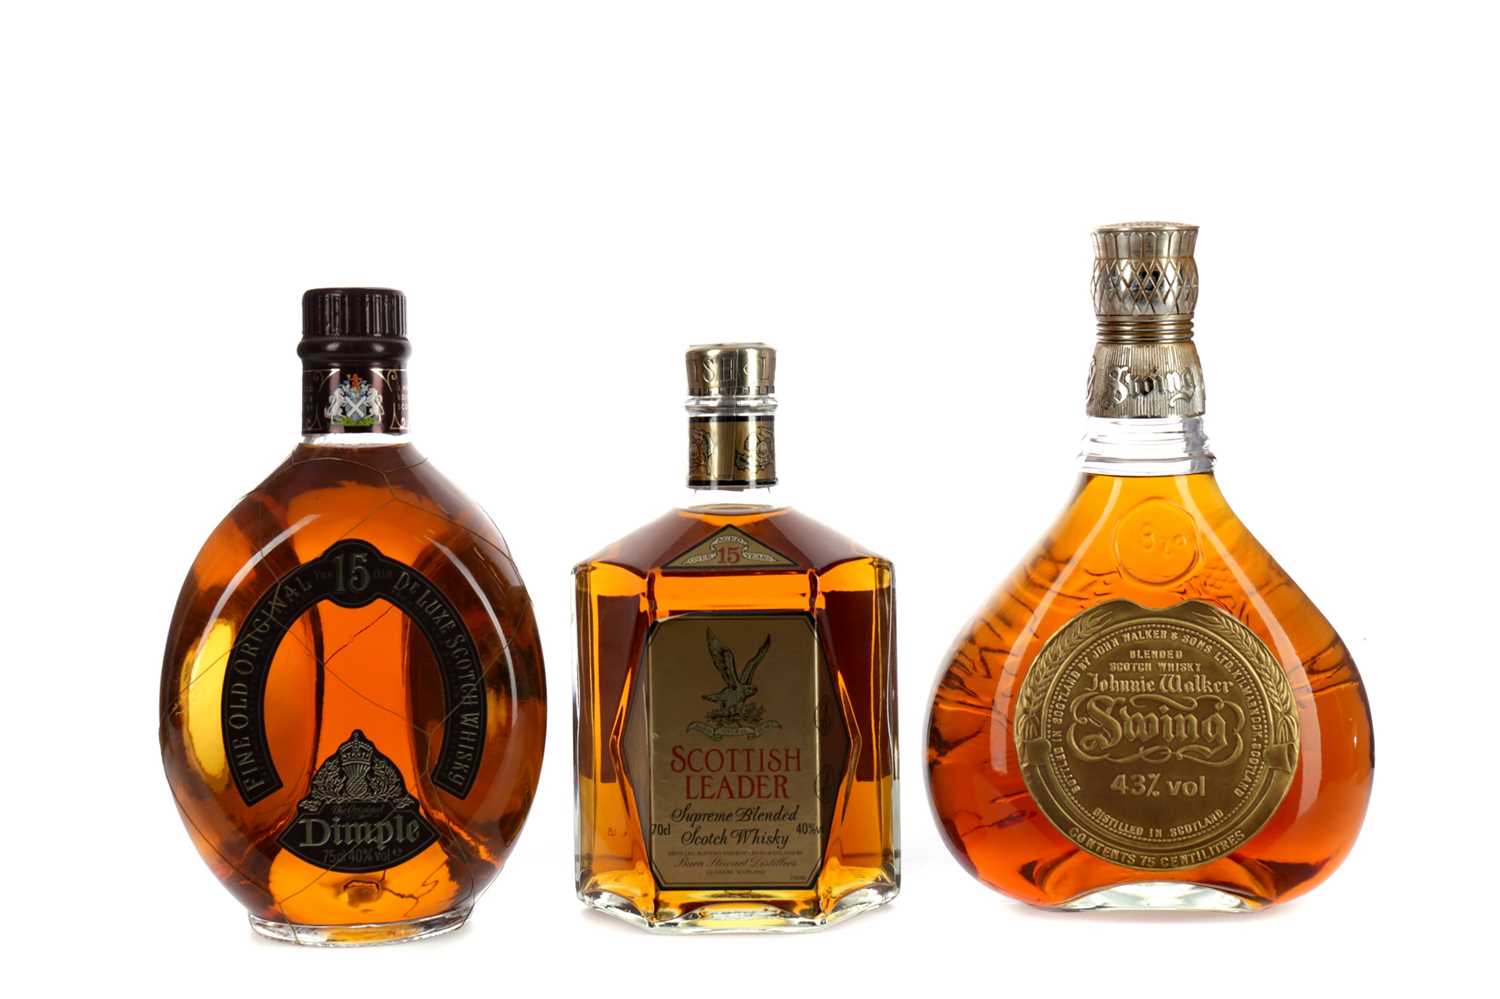 Lot 56 - DIMPLE 15 YEARS OLD, SCOTTISH LEADER AGED 15 YEARS AND JOHNNIE WALKER SWING